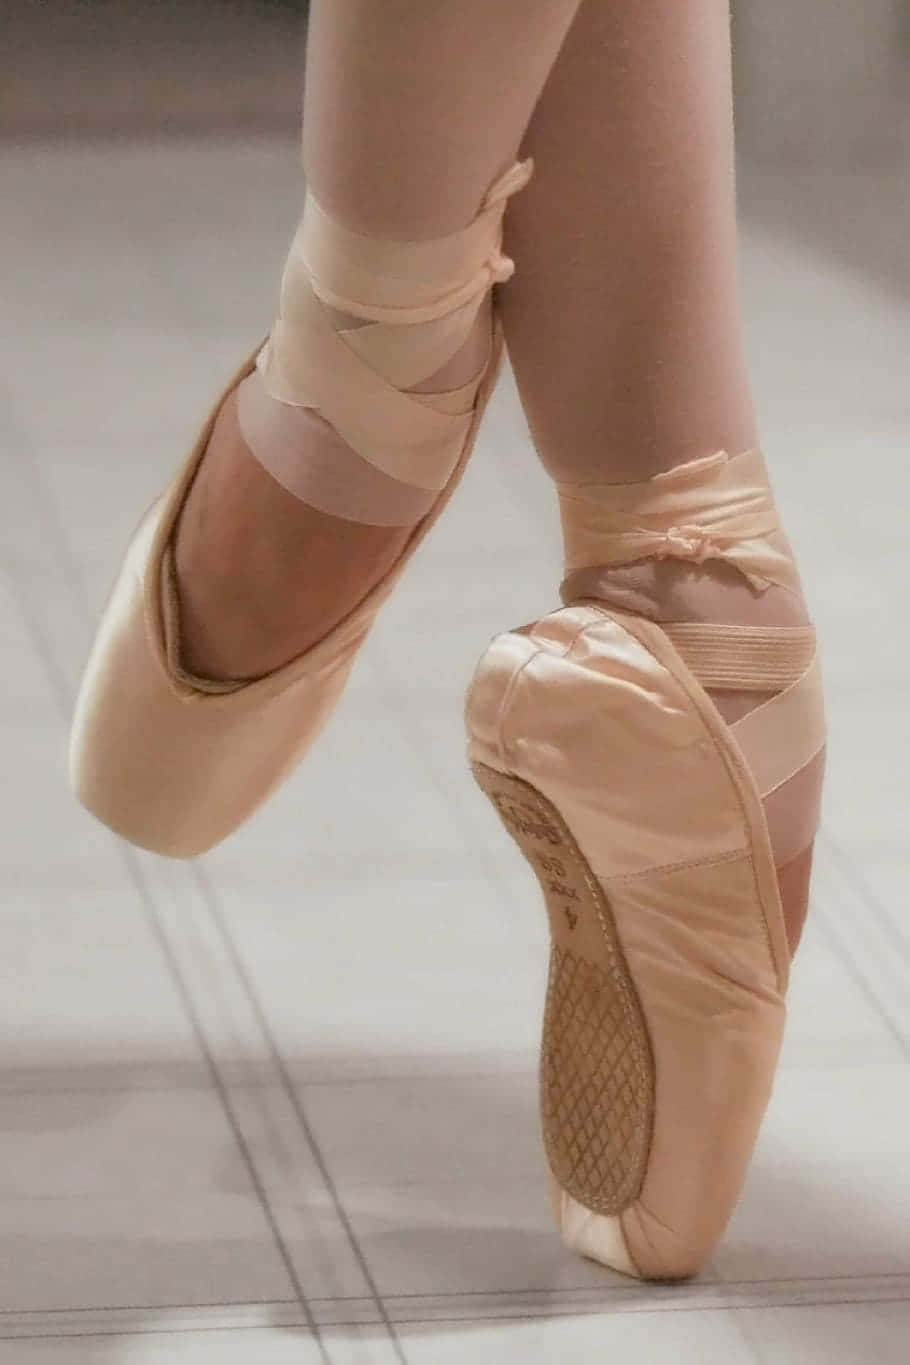 A Woman's Feet Are Shown In Pointe Shoes Wallpaper